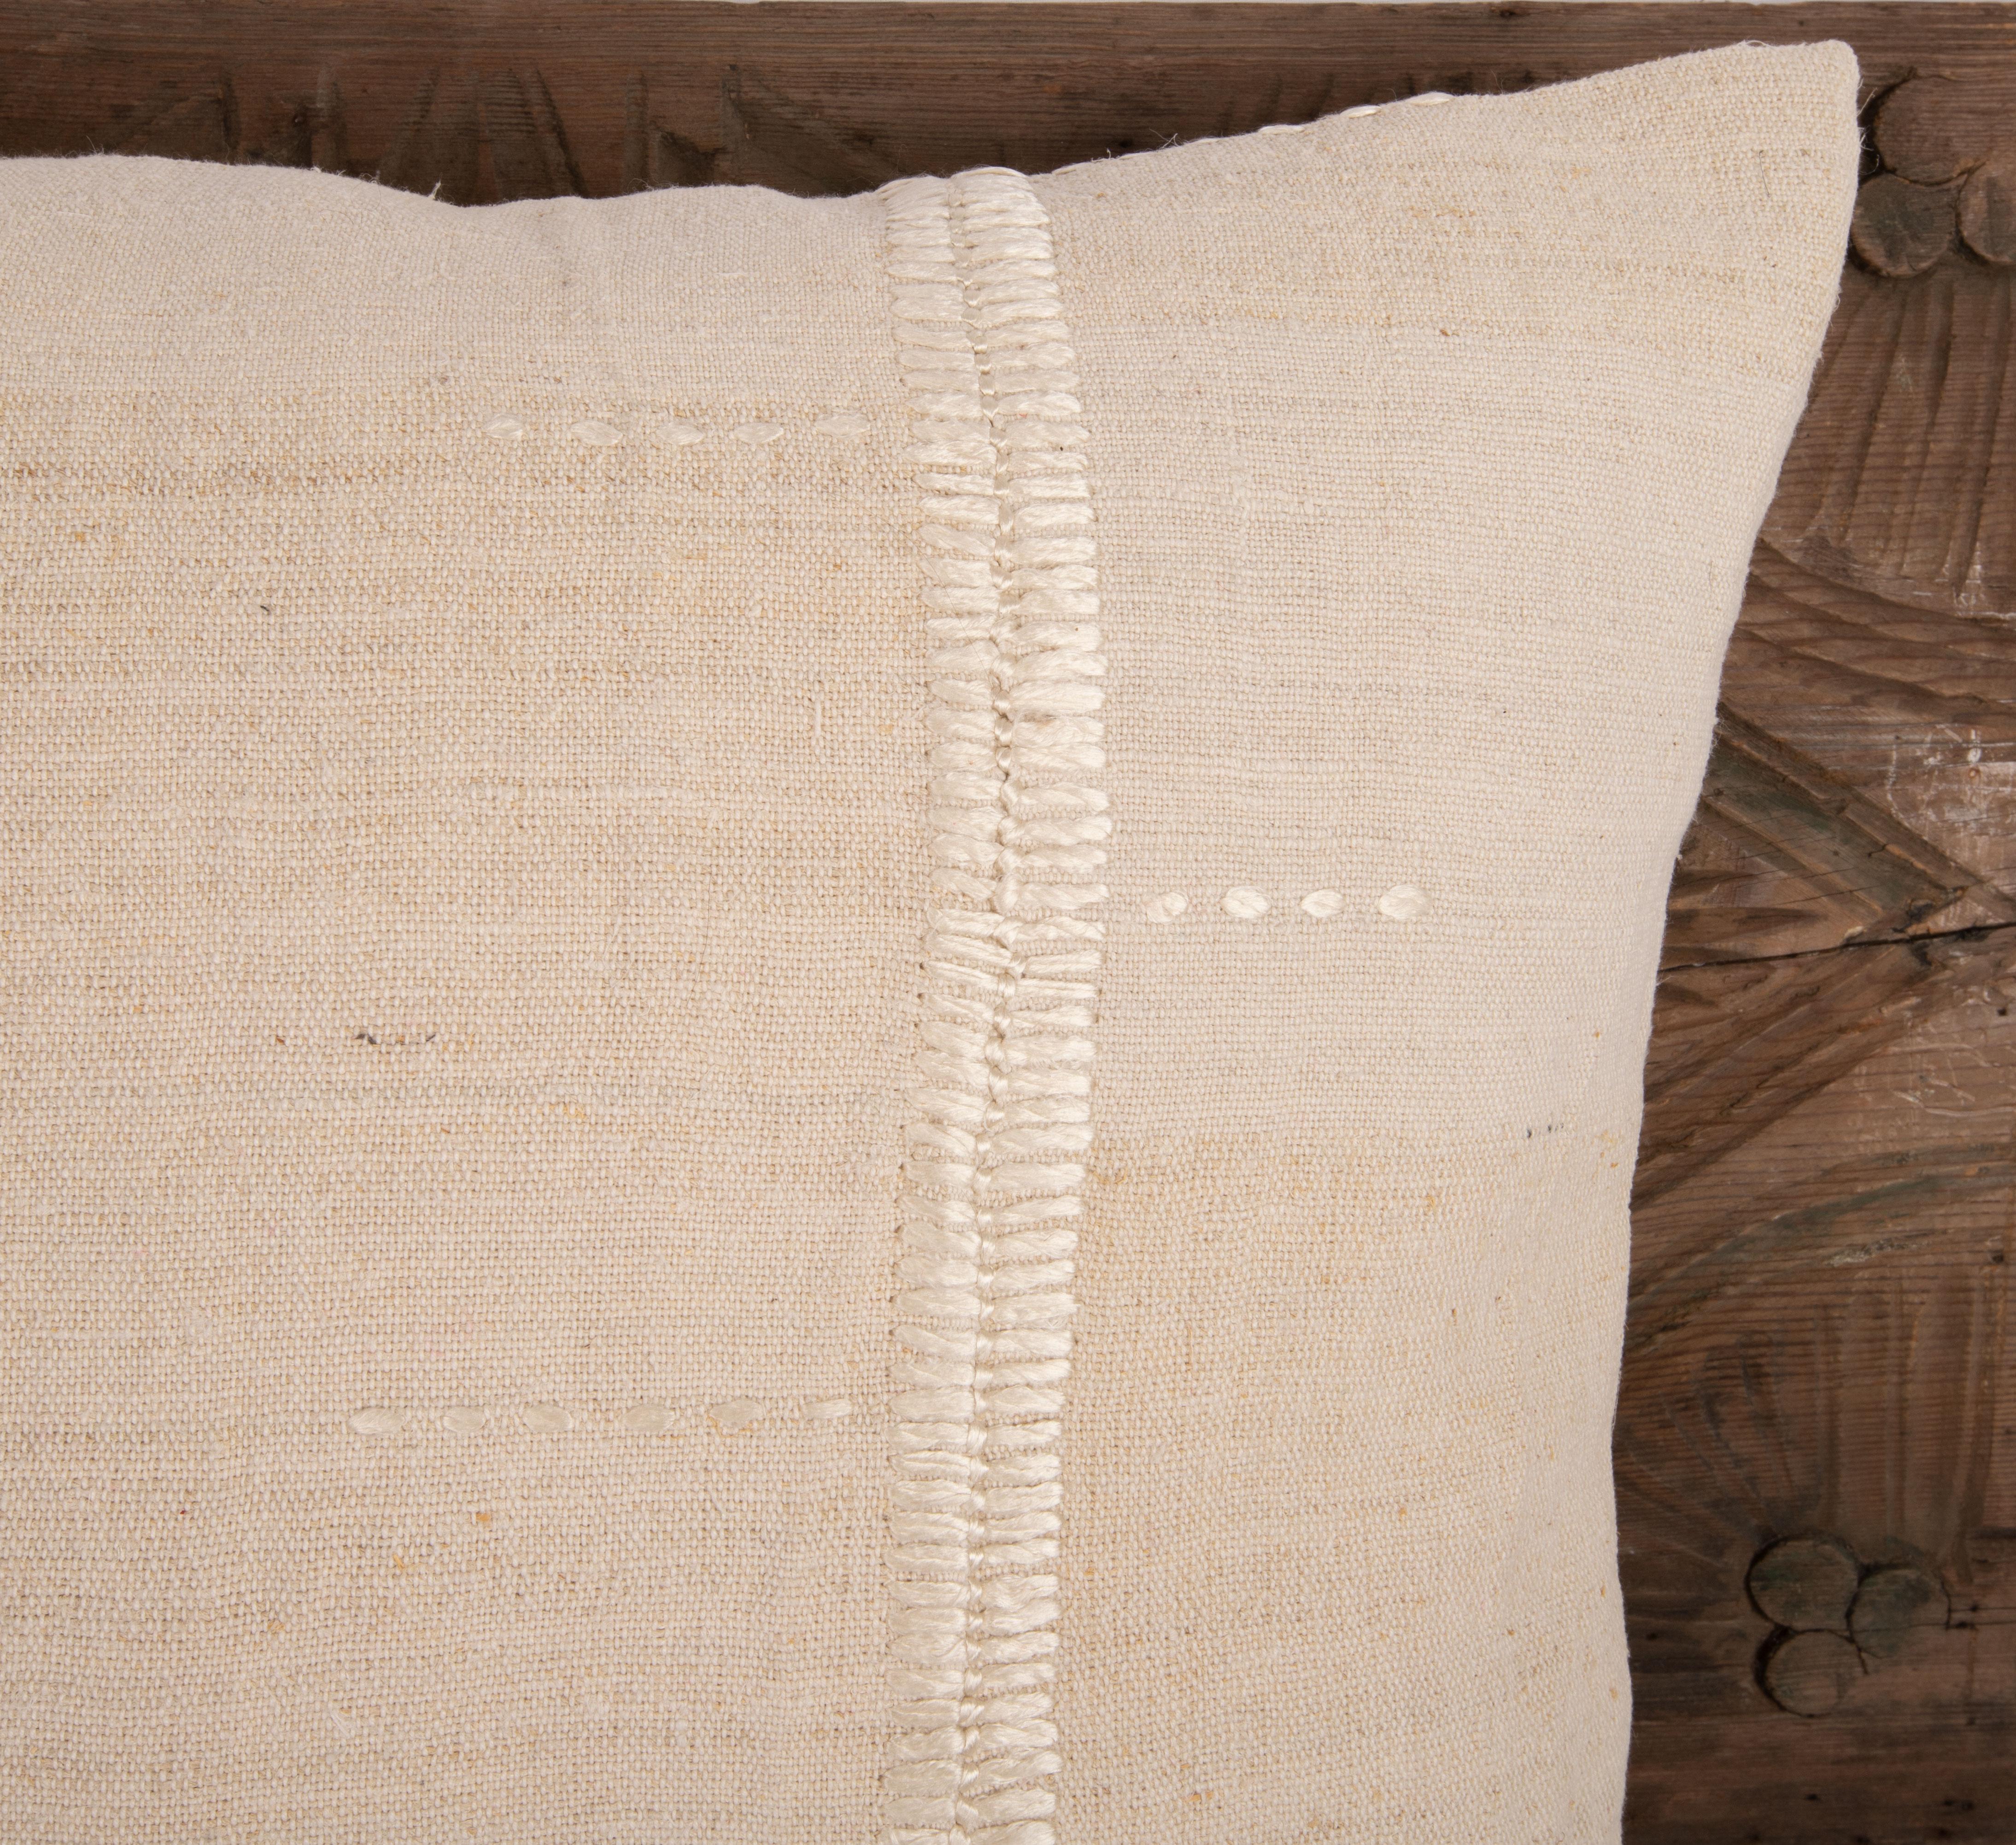 Hand-Woven Rustic Pillow Case Made from a Vintage Anatolian Linen Fabric Mid 20th C. For Sale